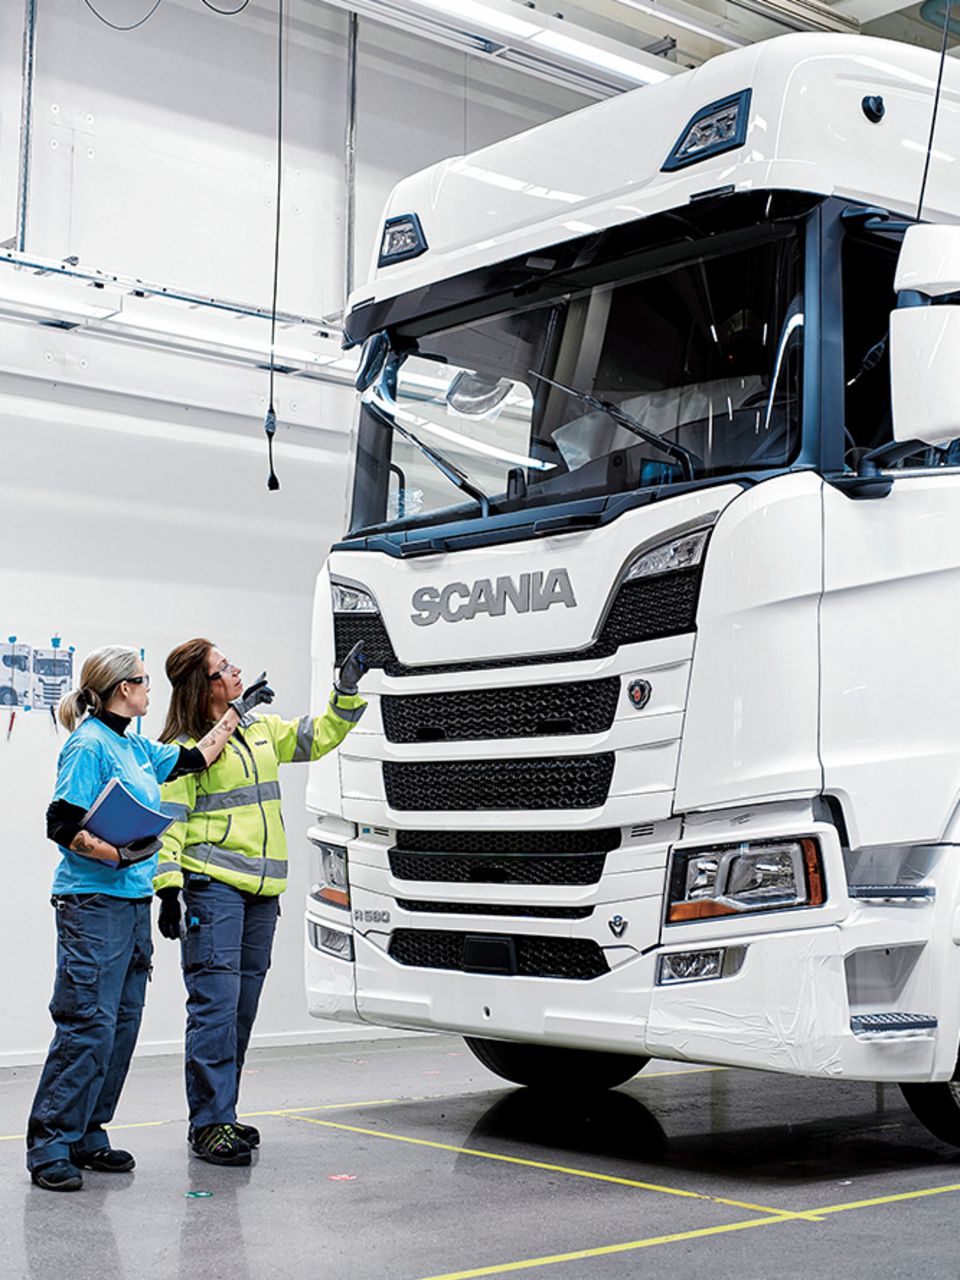 Using Scania’s “Byggladan principle”, a custom-fit vehicle can be built for every intended vehicle use, regardless of the number of units.